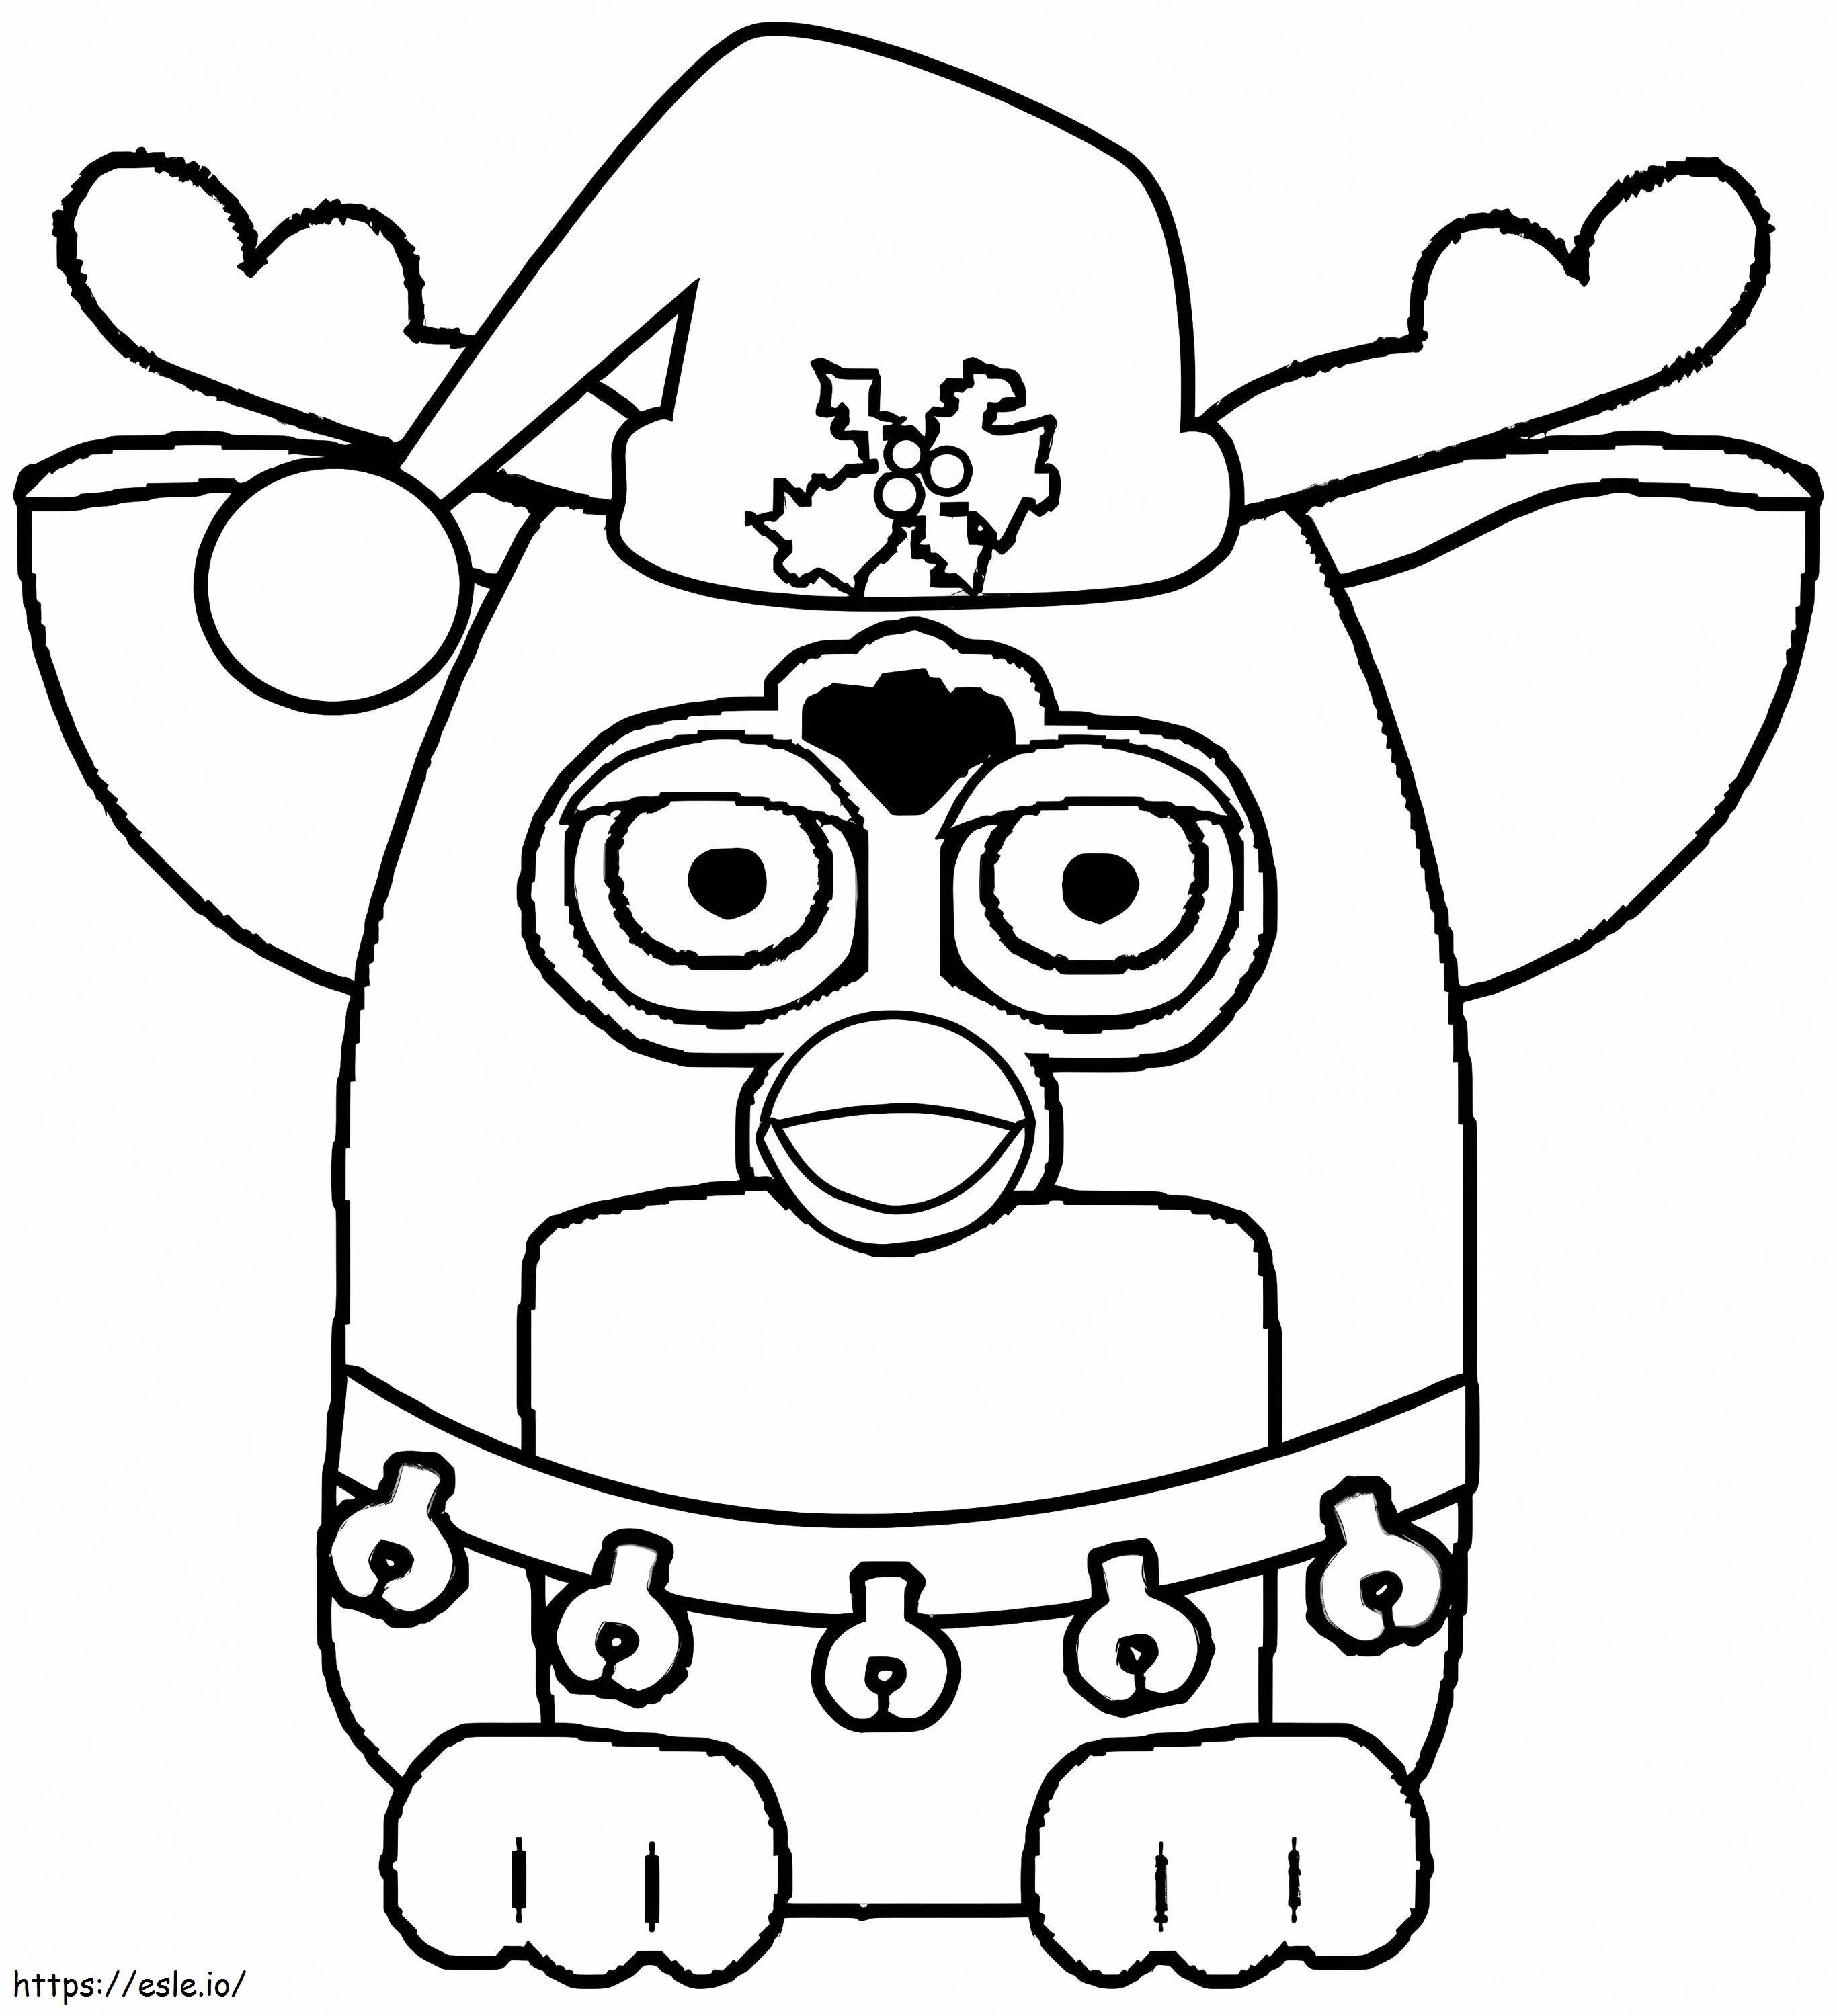 Christmas Furby coloring page